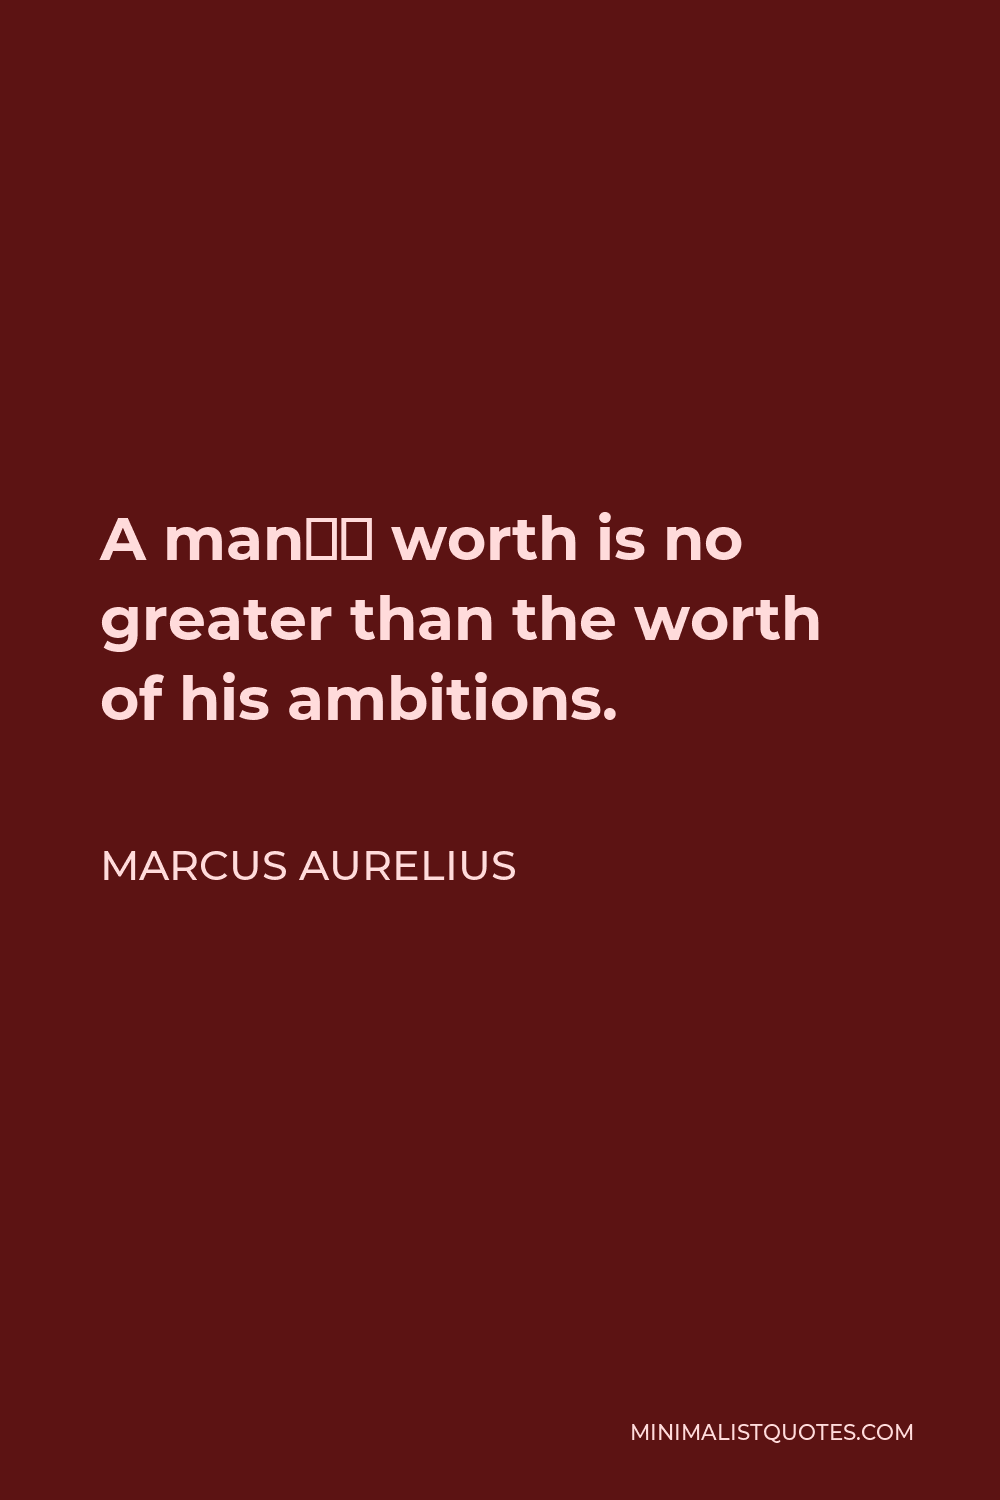 Marcus Aurelius Quote - A man’s worth is no greater than the worth of his ambitions.